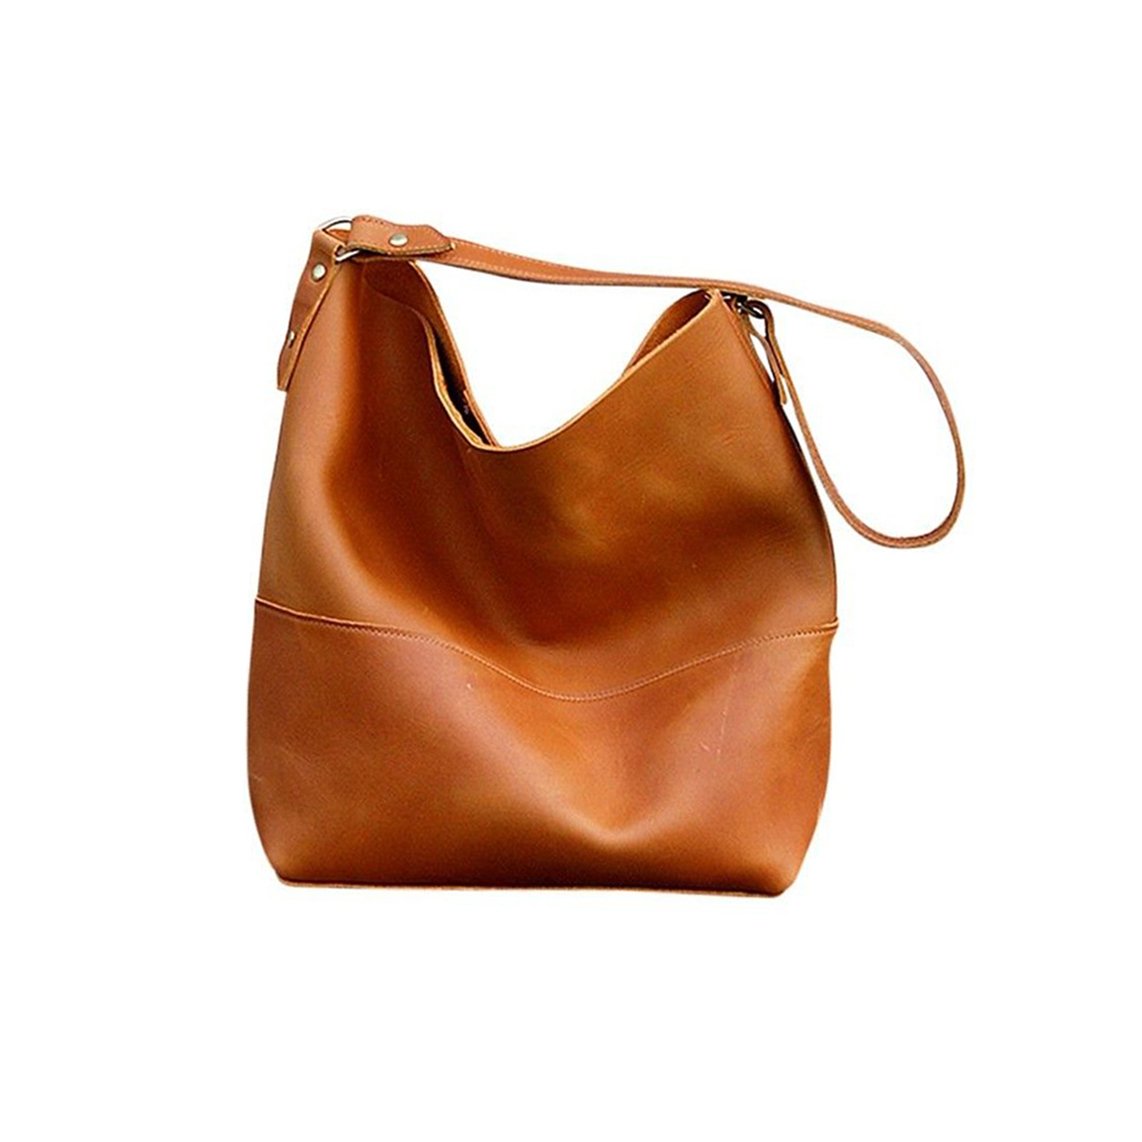 Send Ladies Leather Gifts to India, Leather Bags, Ladies Hand Bag to India